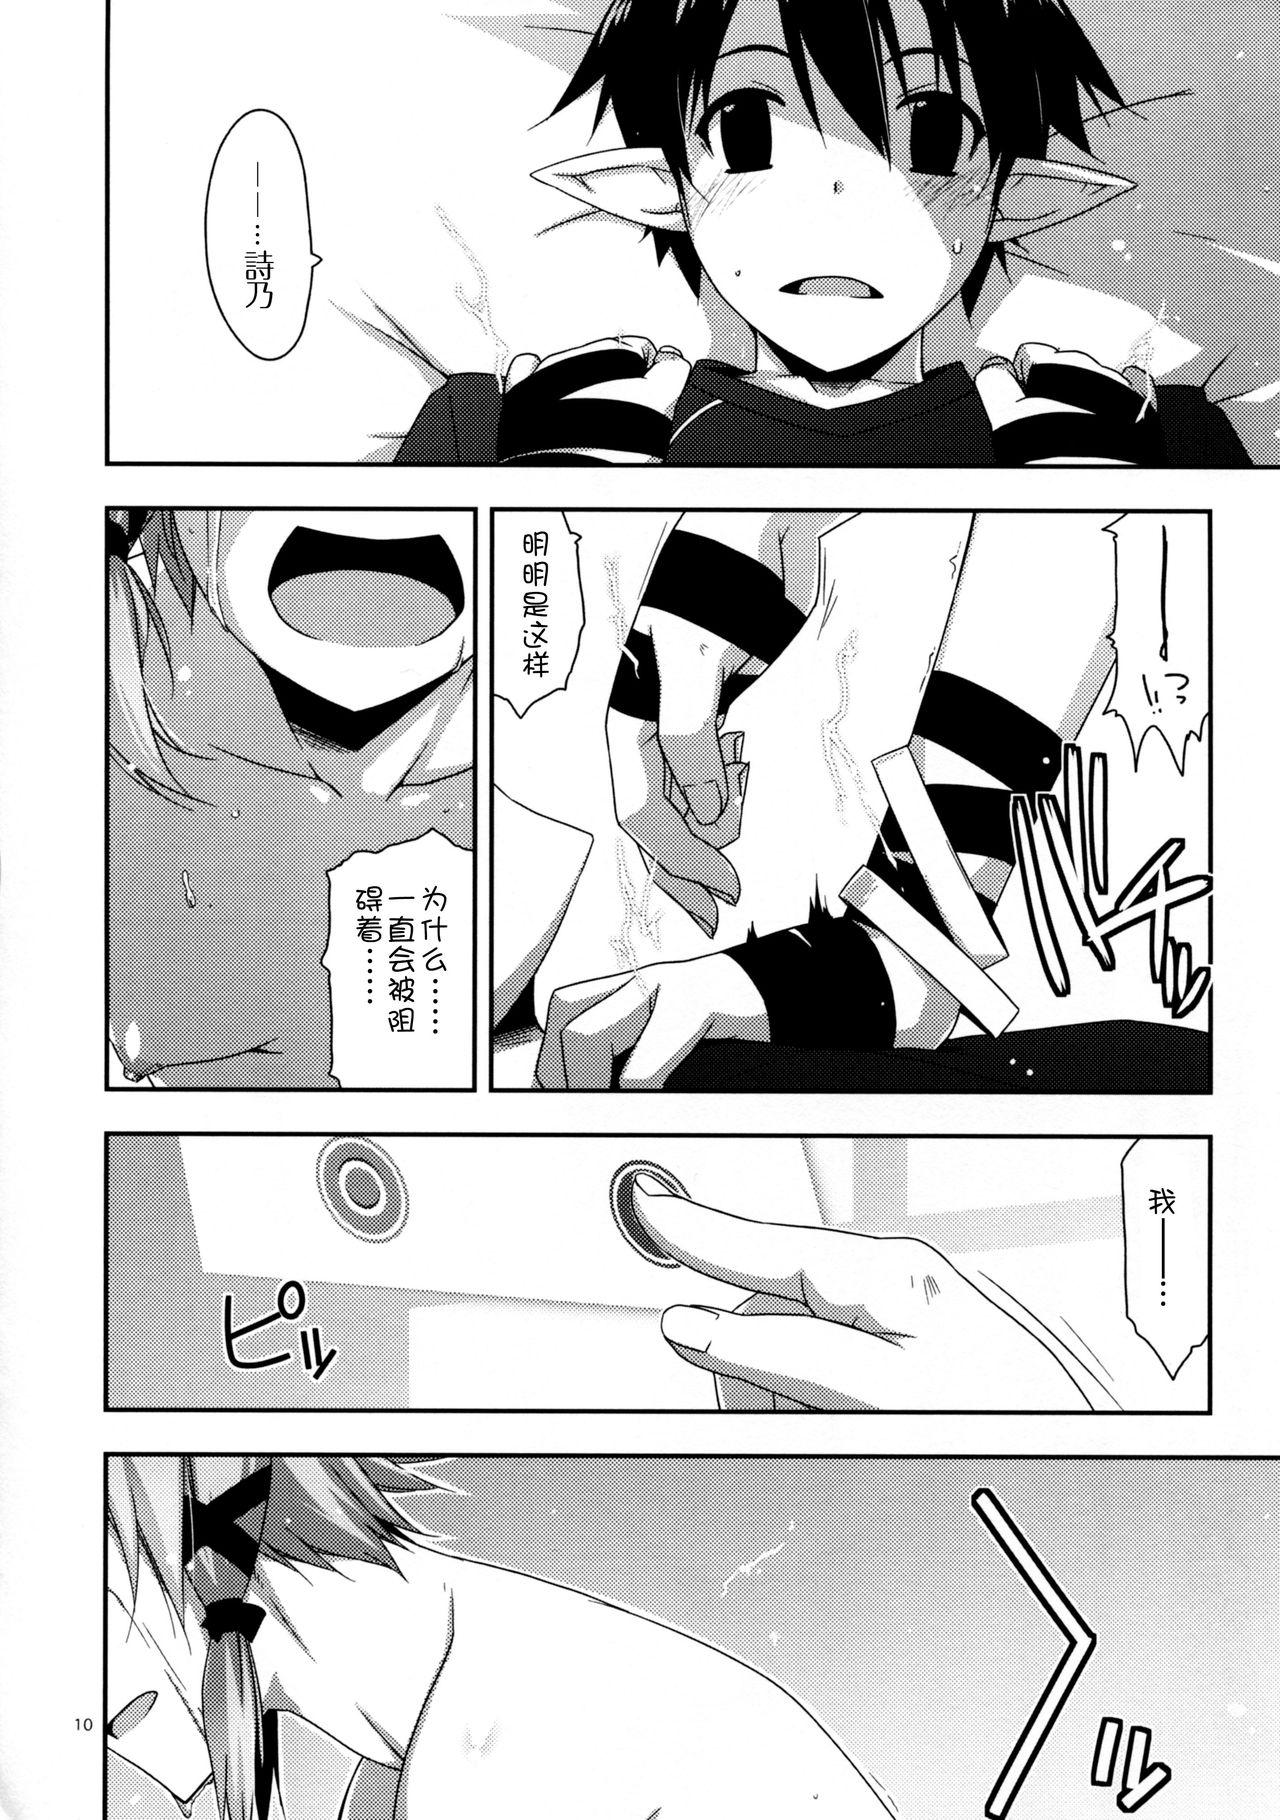 Clothed Case closed. - Sword art online Denmark - Page 11